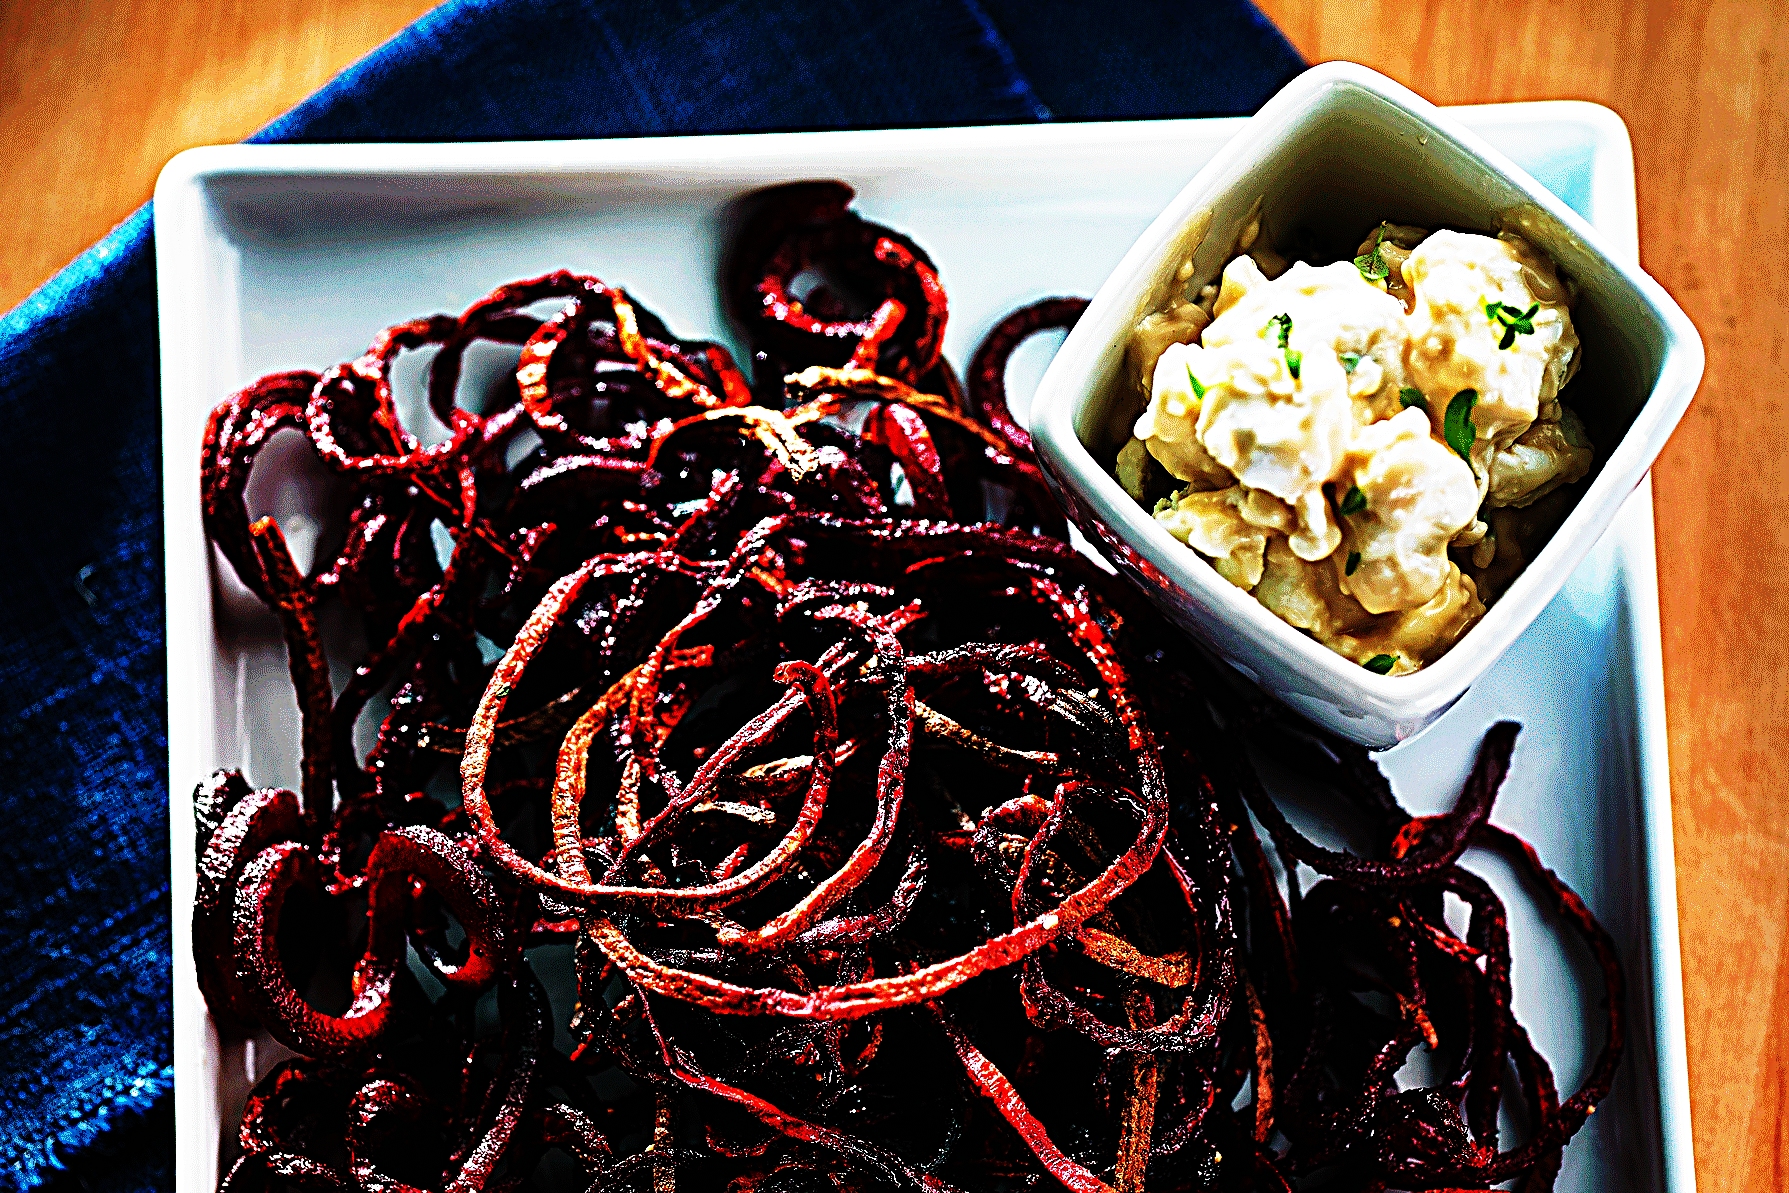 Stupid-Easy Recipe for Roasted Beet Strings (#1 Top-Rated)